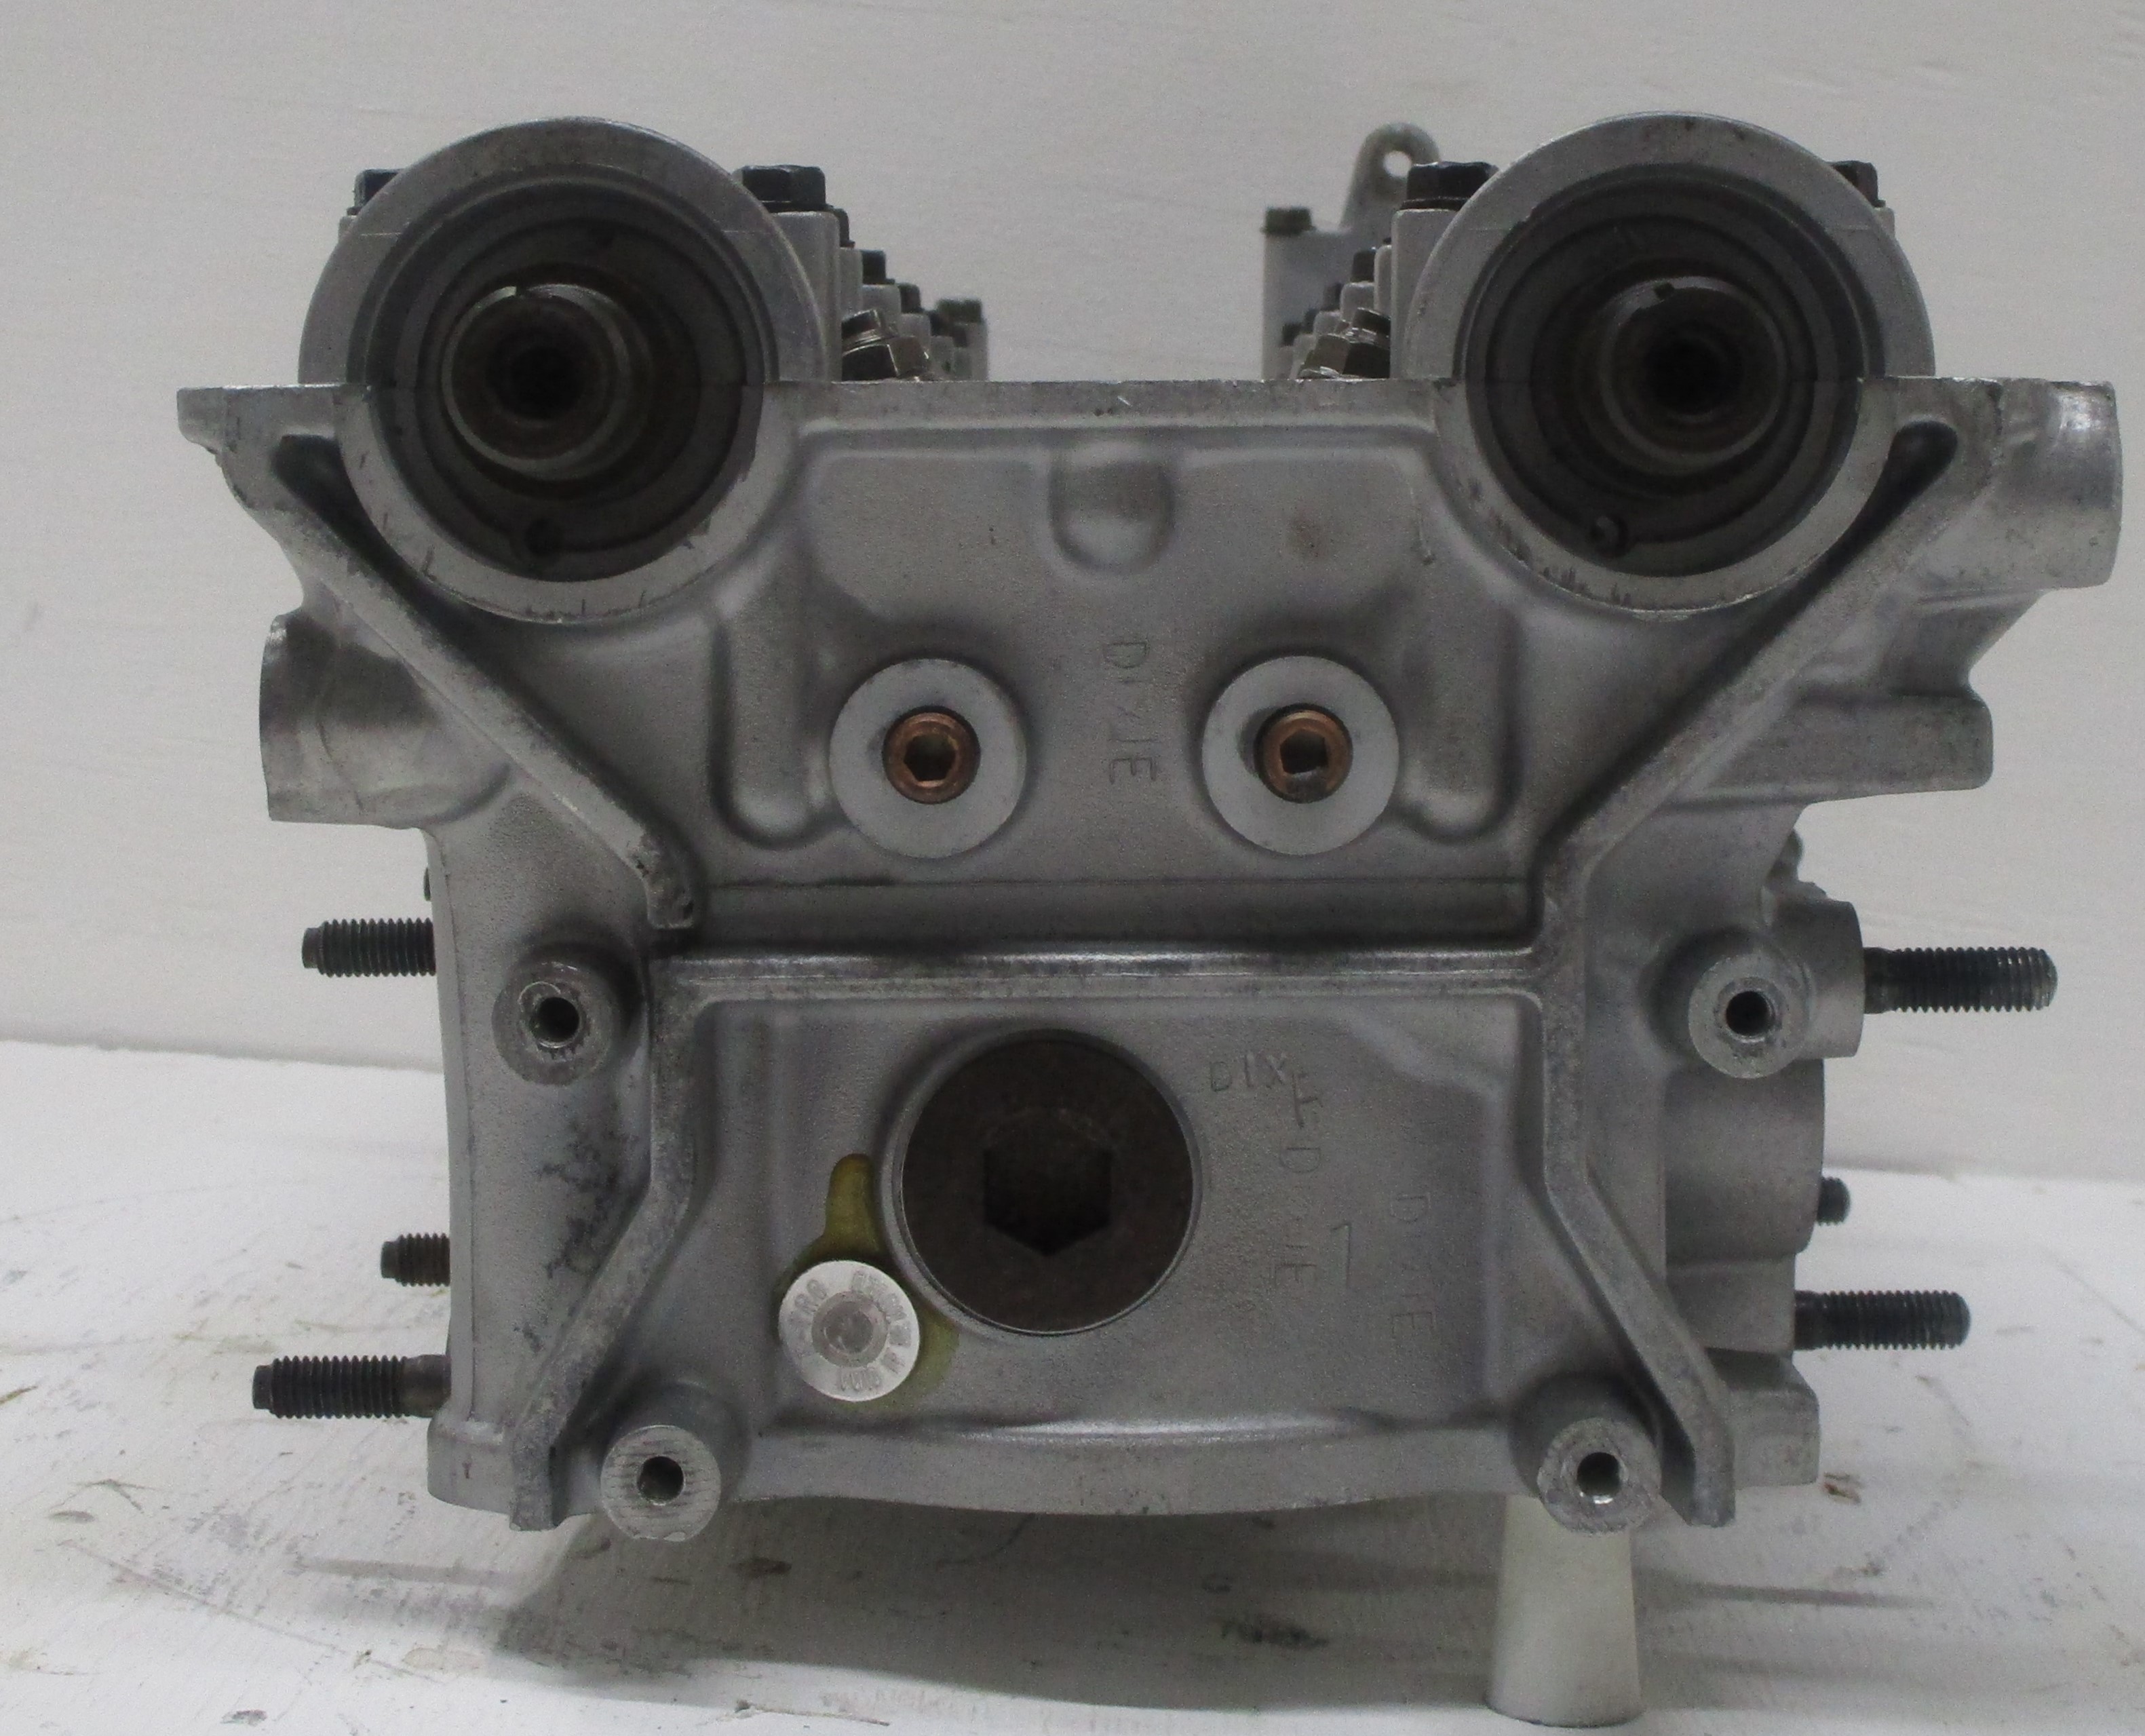 1990-1995 Acura Integra 1.8L (B18A1/B18B1) Non-VTEC Reconditioned Cylinder Head w/Cams ($100 Core Charge)